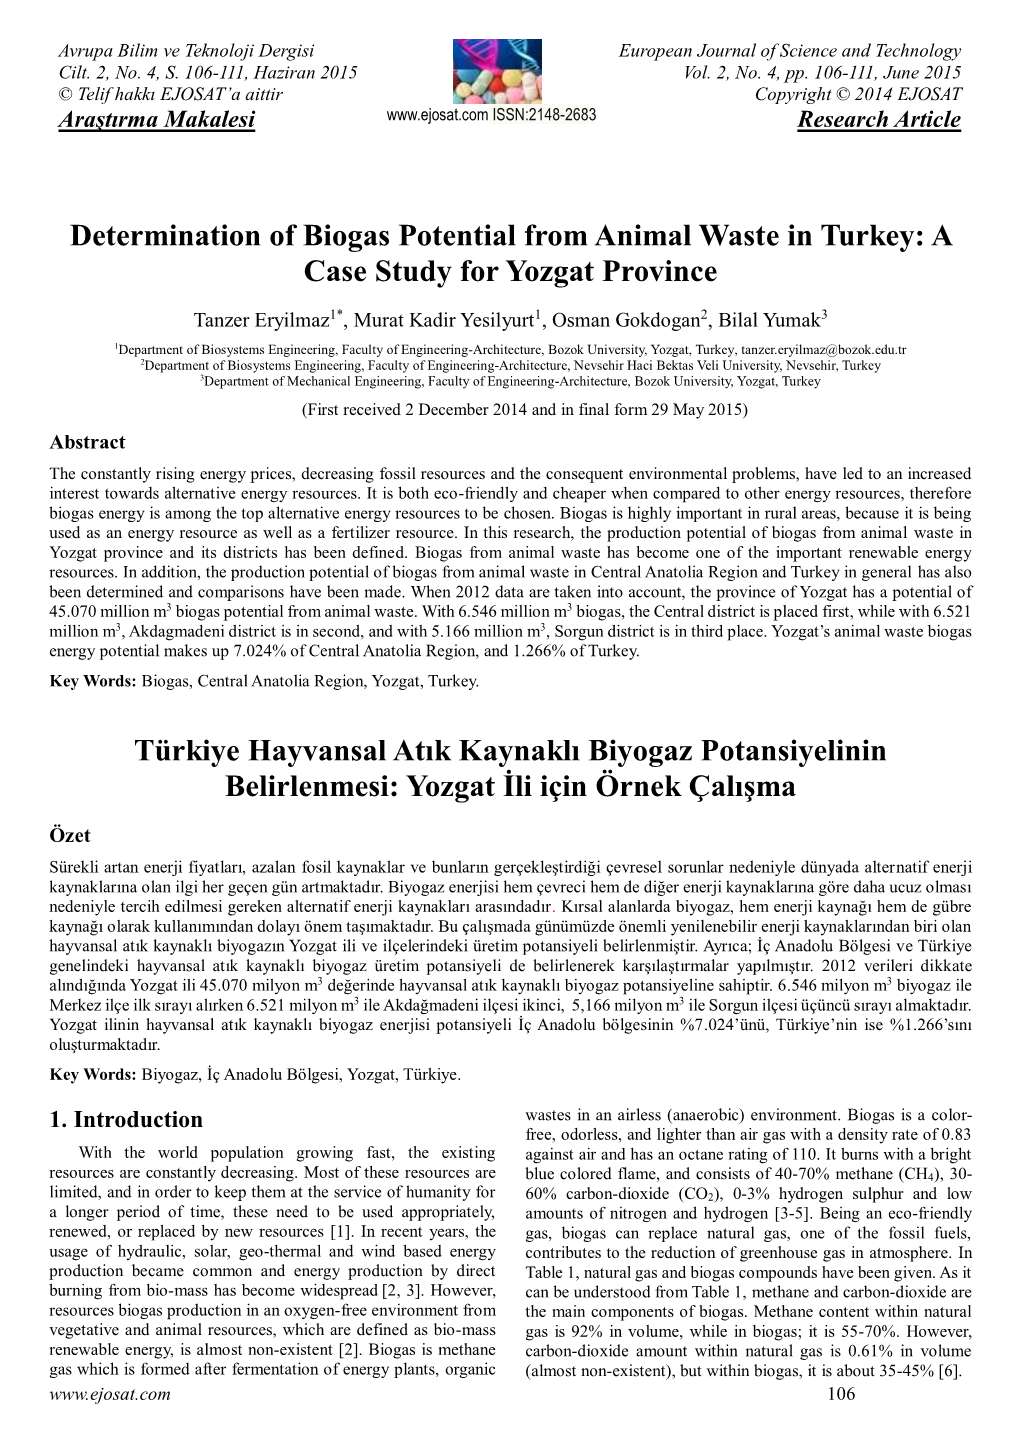 Determination of Biogas Potential from Animal Waste in Turkey: a Case Study for Yozgat Province